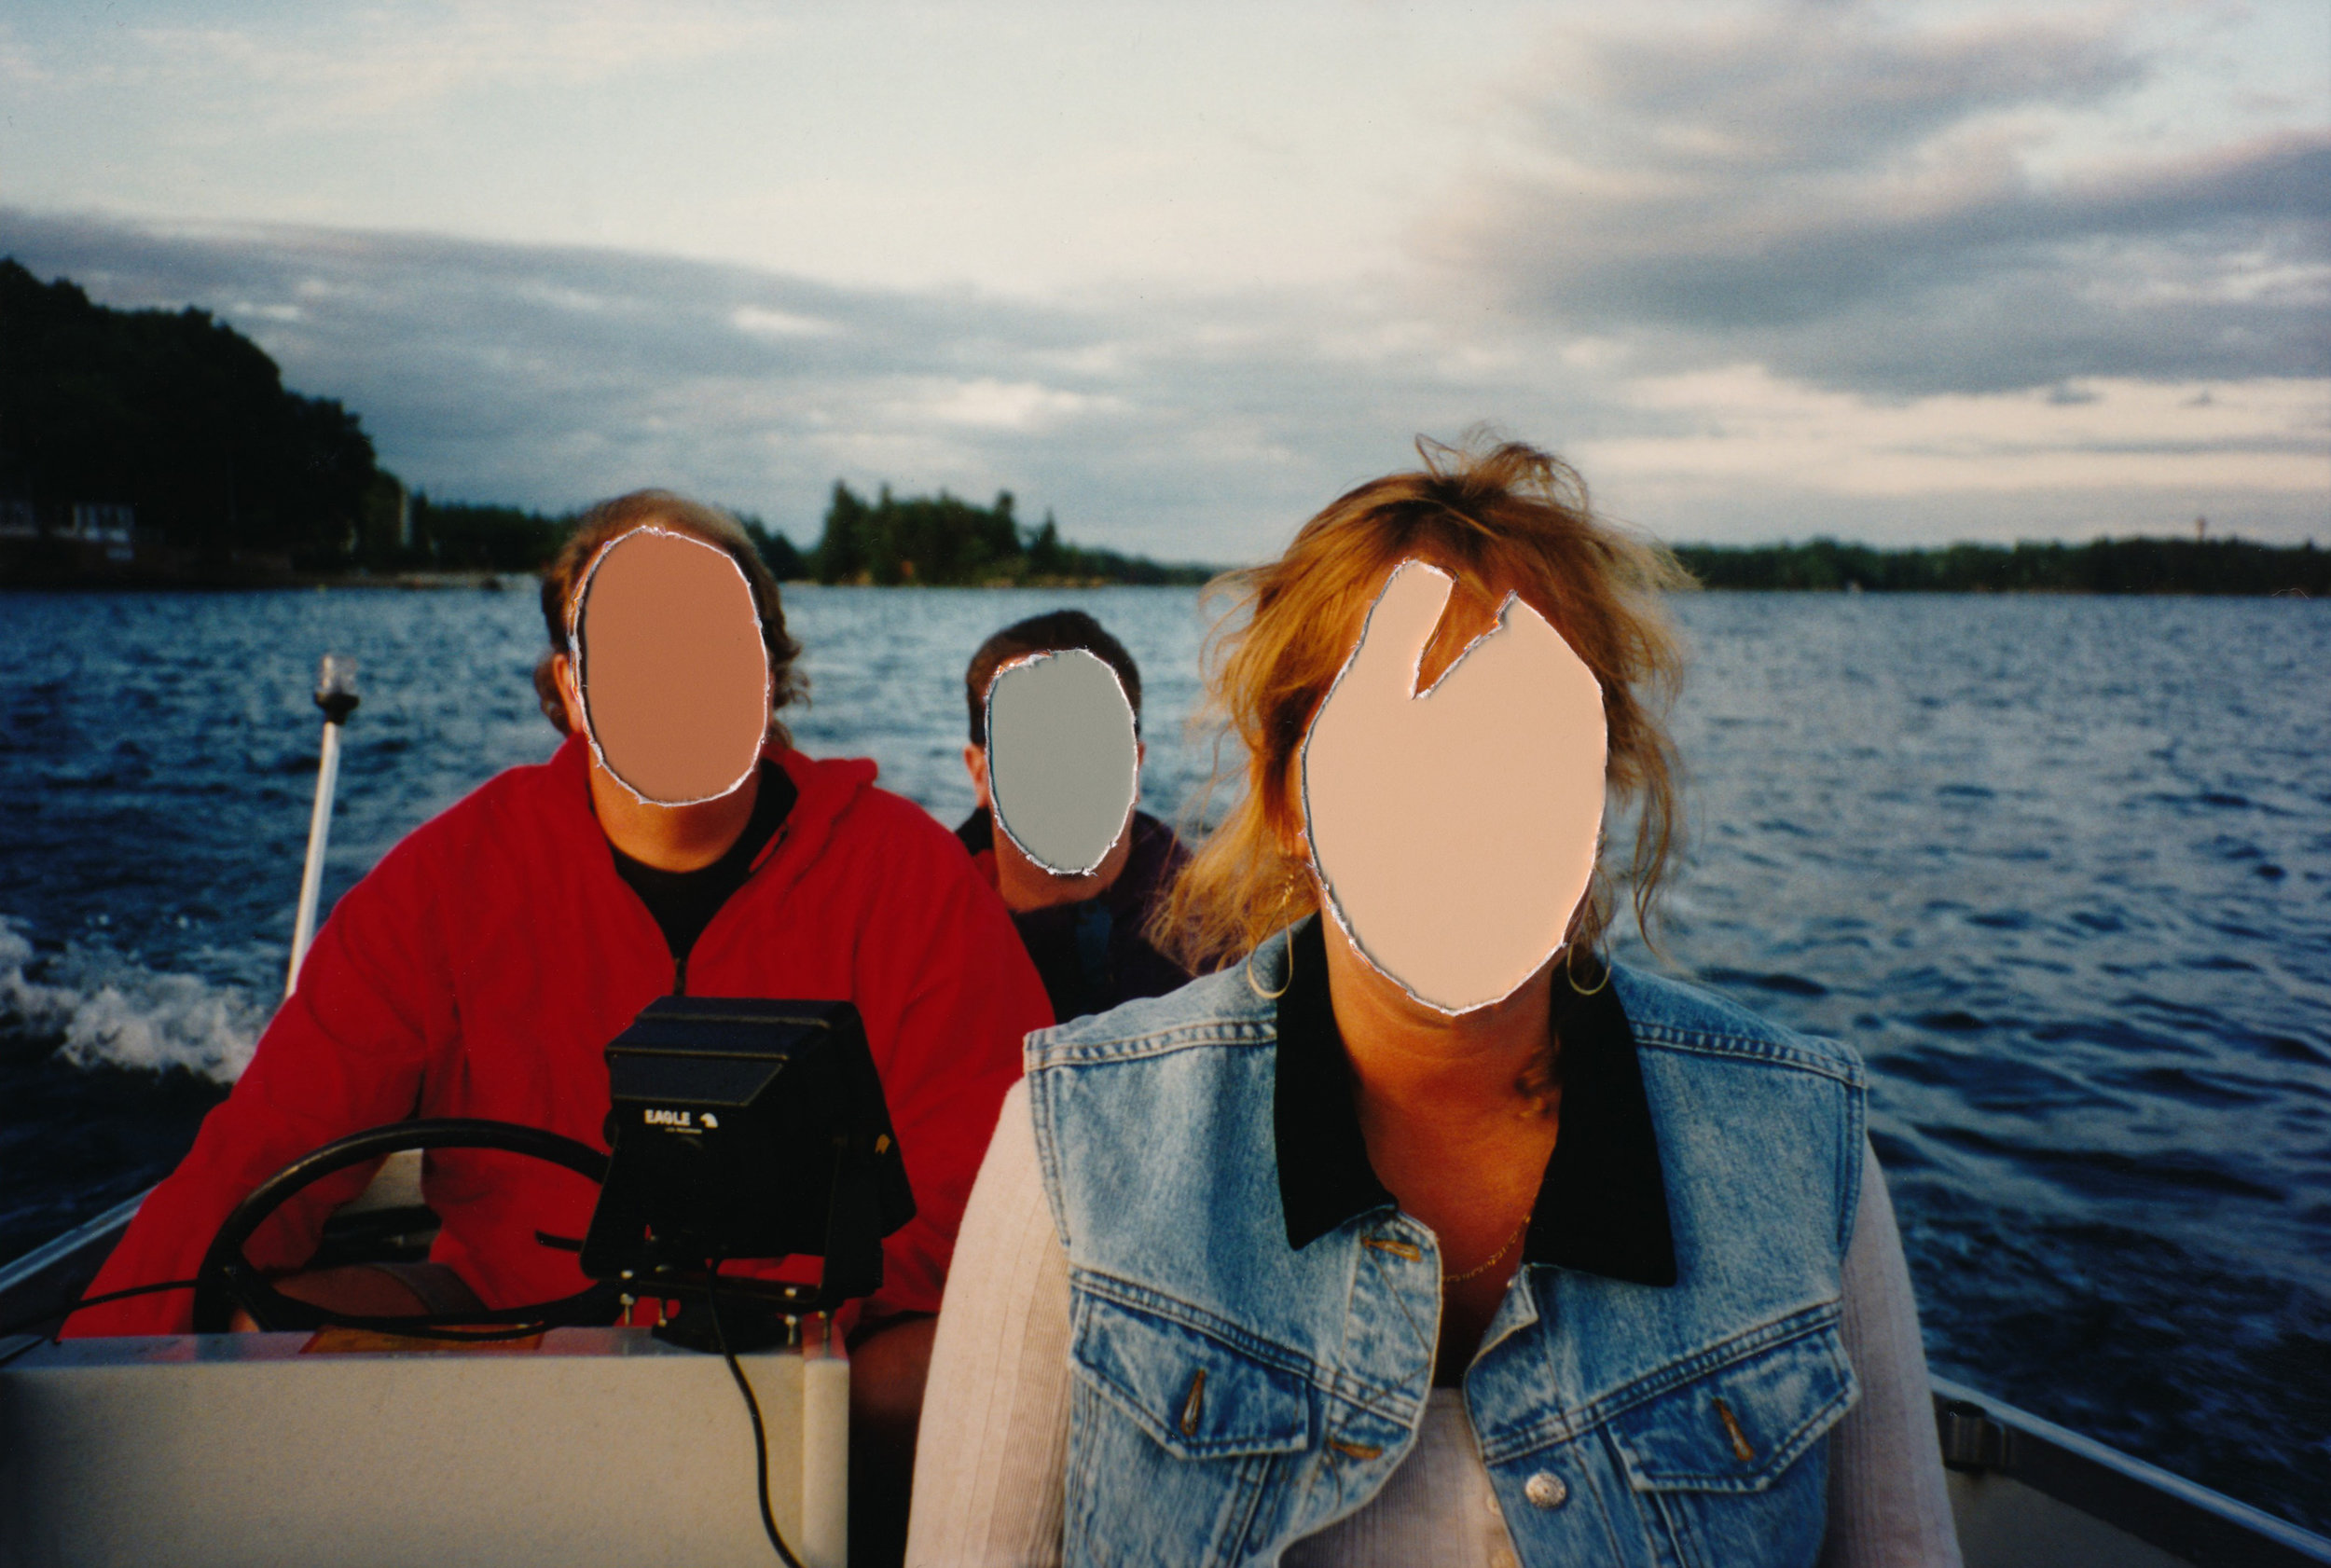 Mom and dad with a friend boating on Canadian waters, 1994